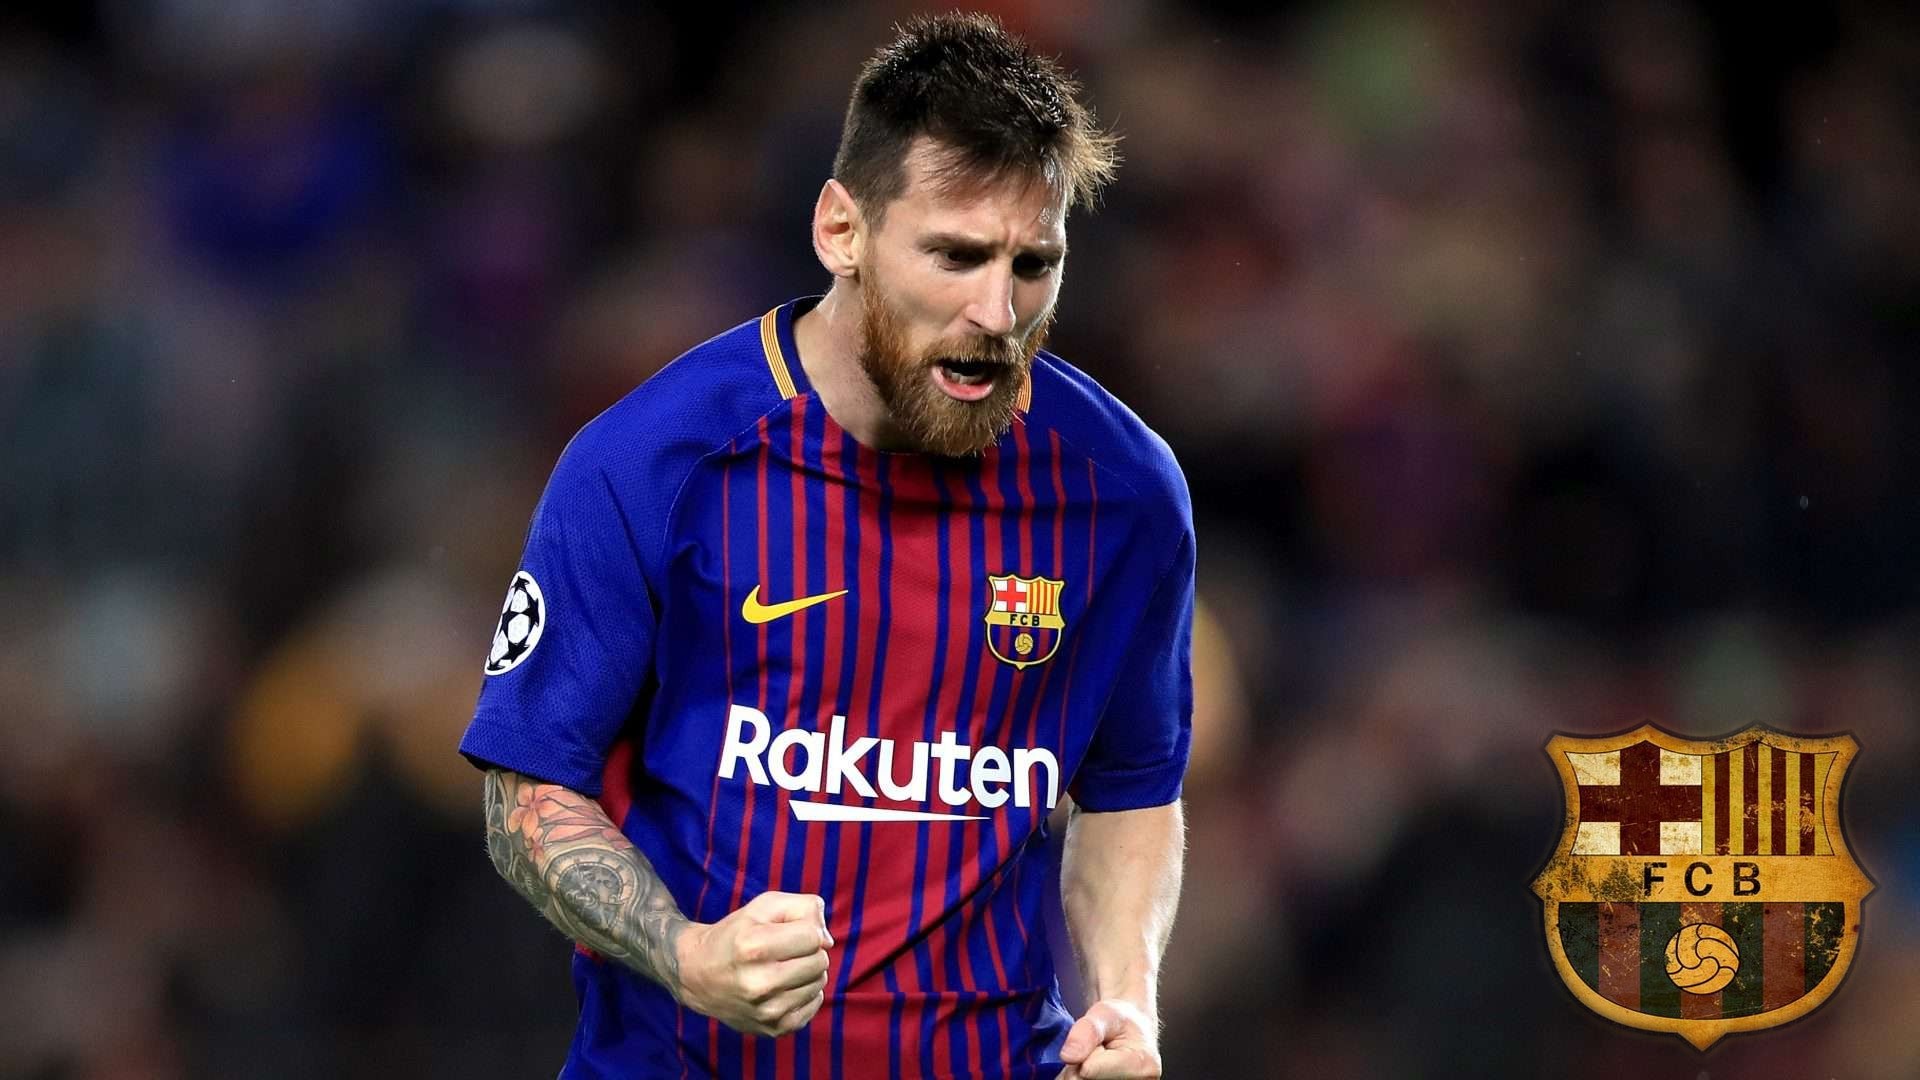 Lionel Messi HD Wallpapers With Resolution 1920X1080 pixel. You can make this wallpaper for your Mac or Windows Desktop Background, iPhone, Android or Tablet and another Smartphone device for free